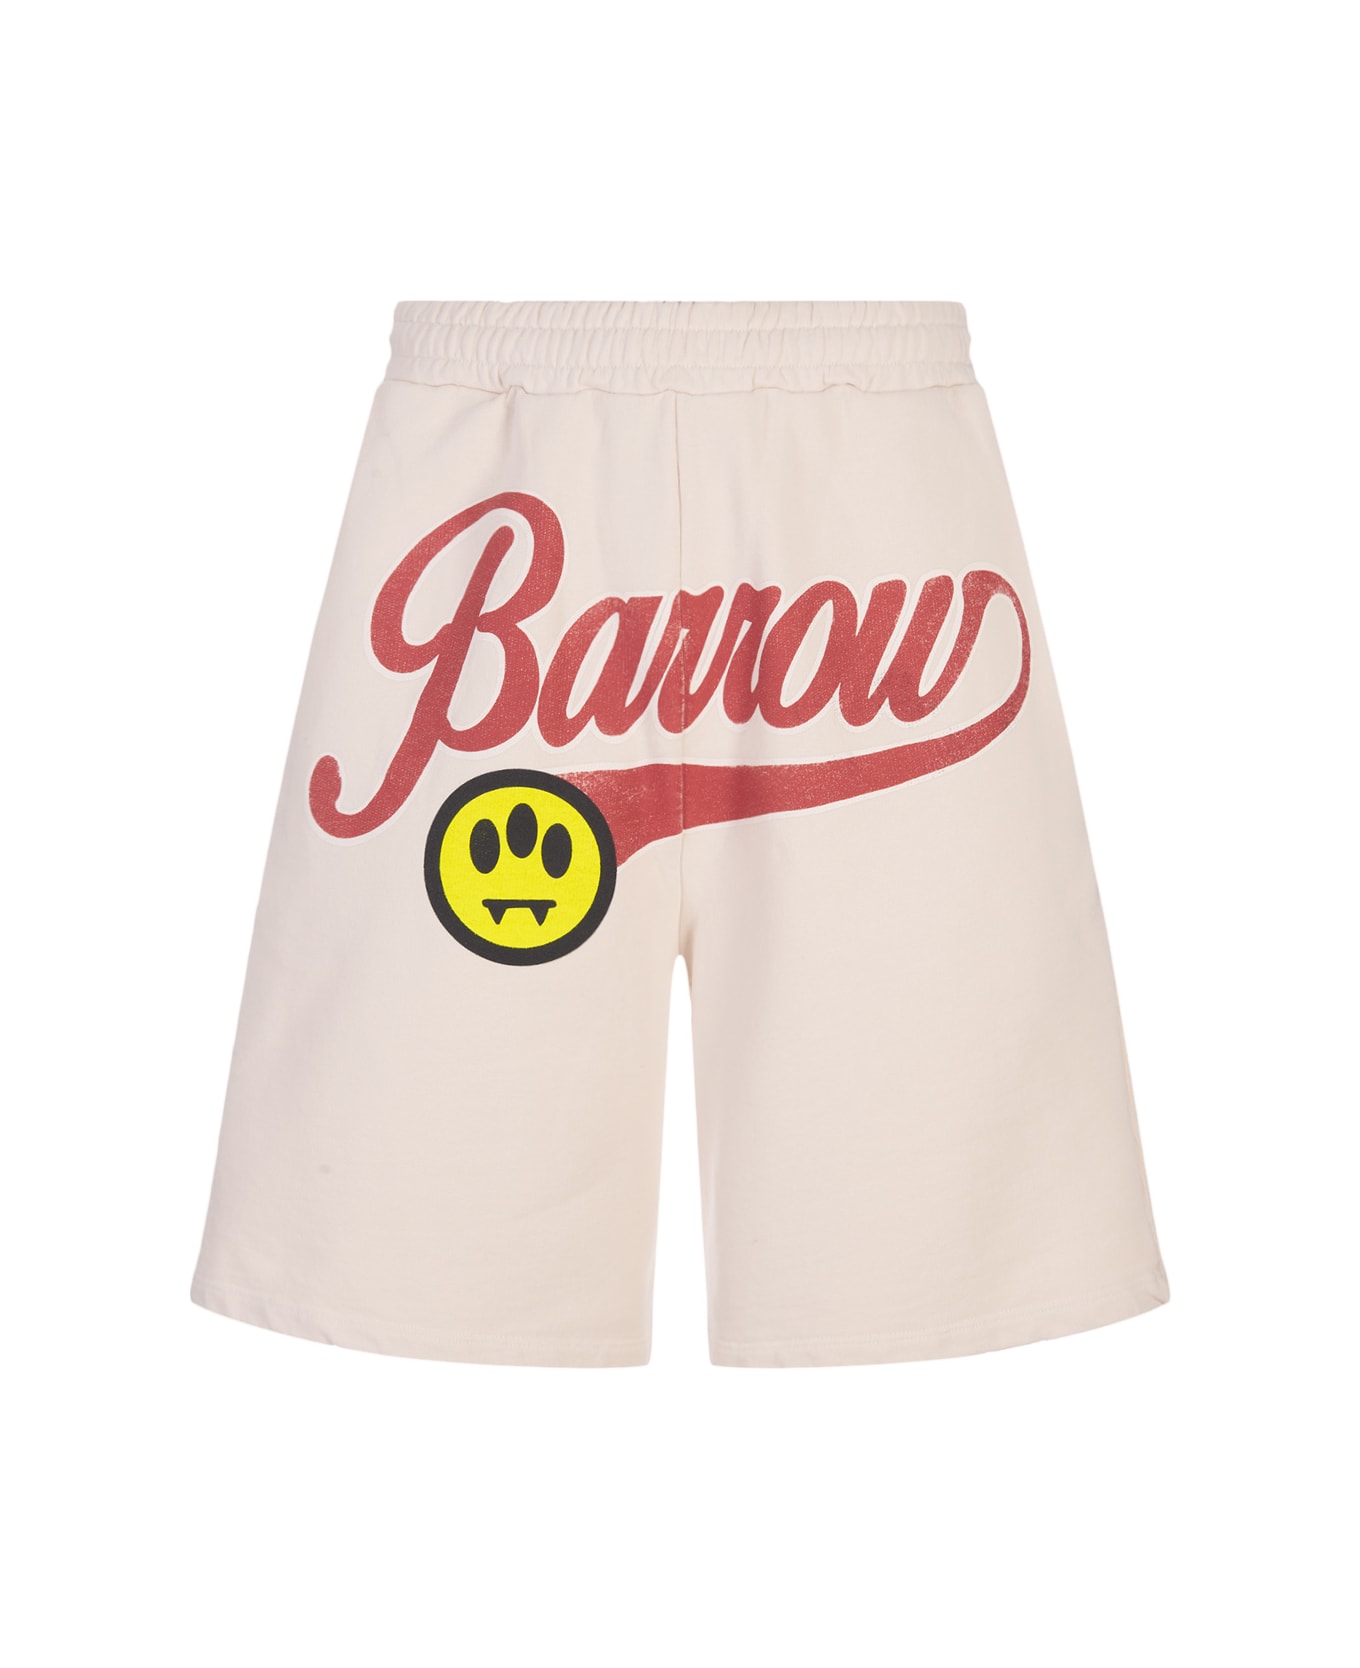 Barrow Taupe Bermuda Shorts With Lettering Prints. - Brown